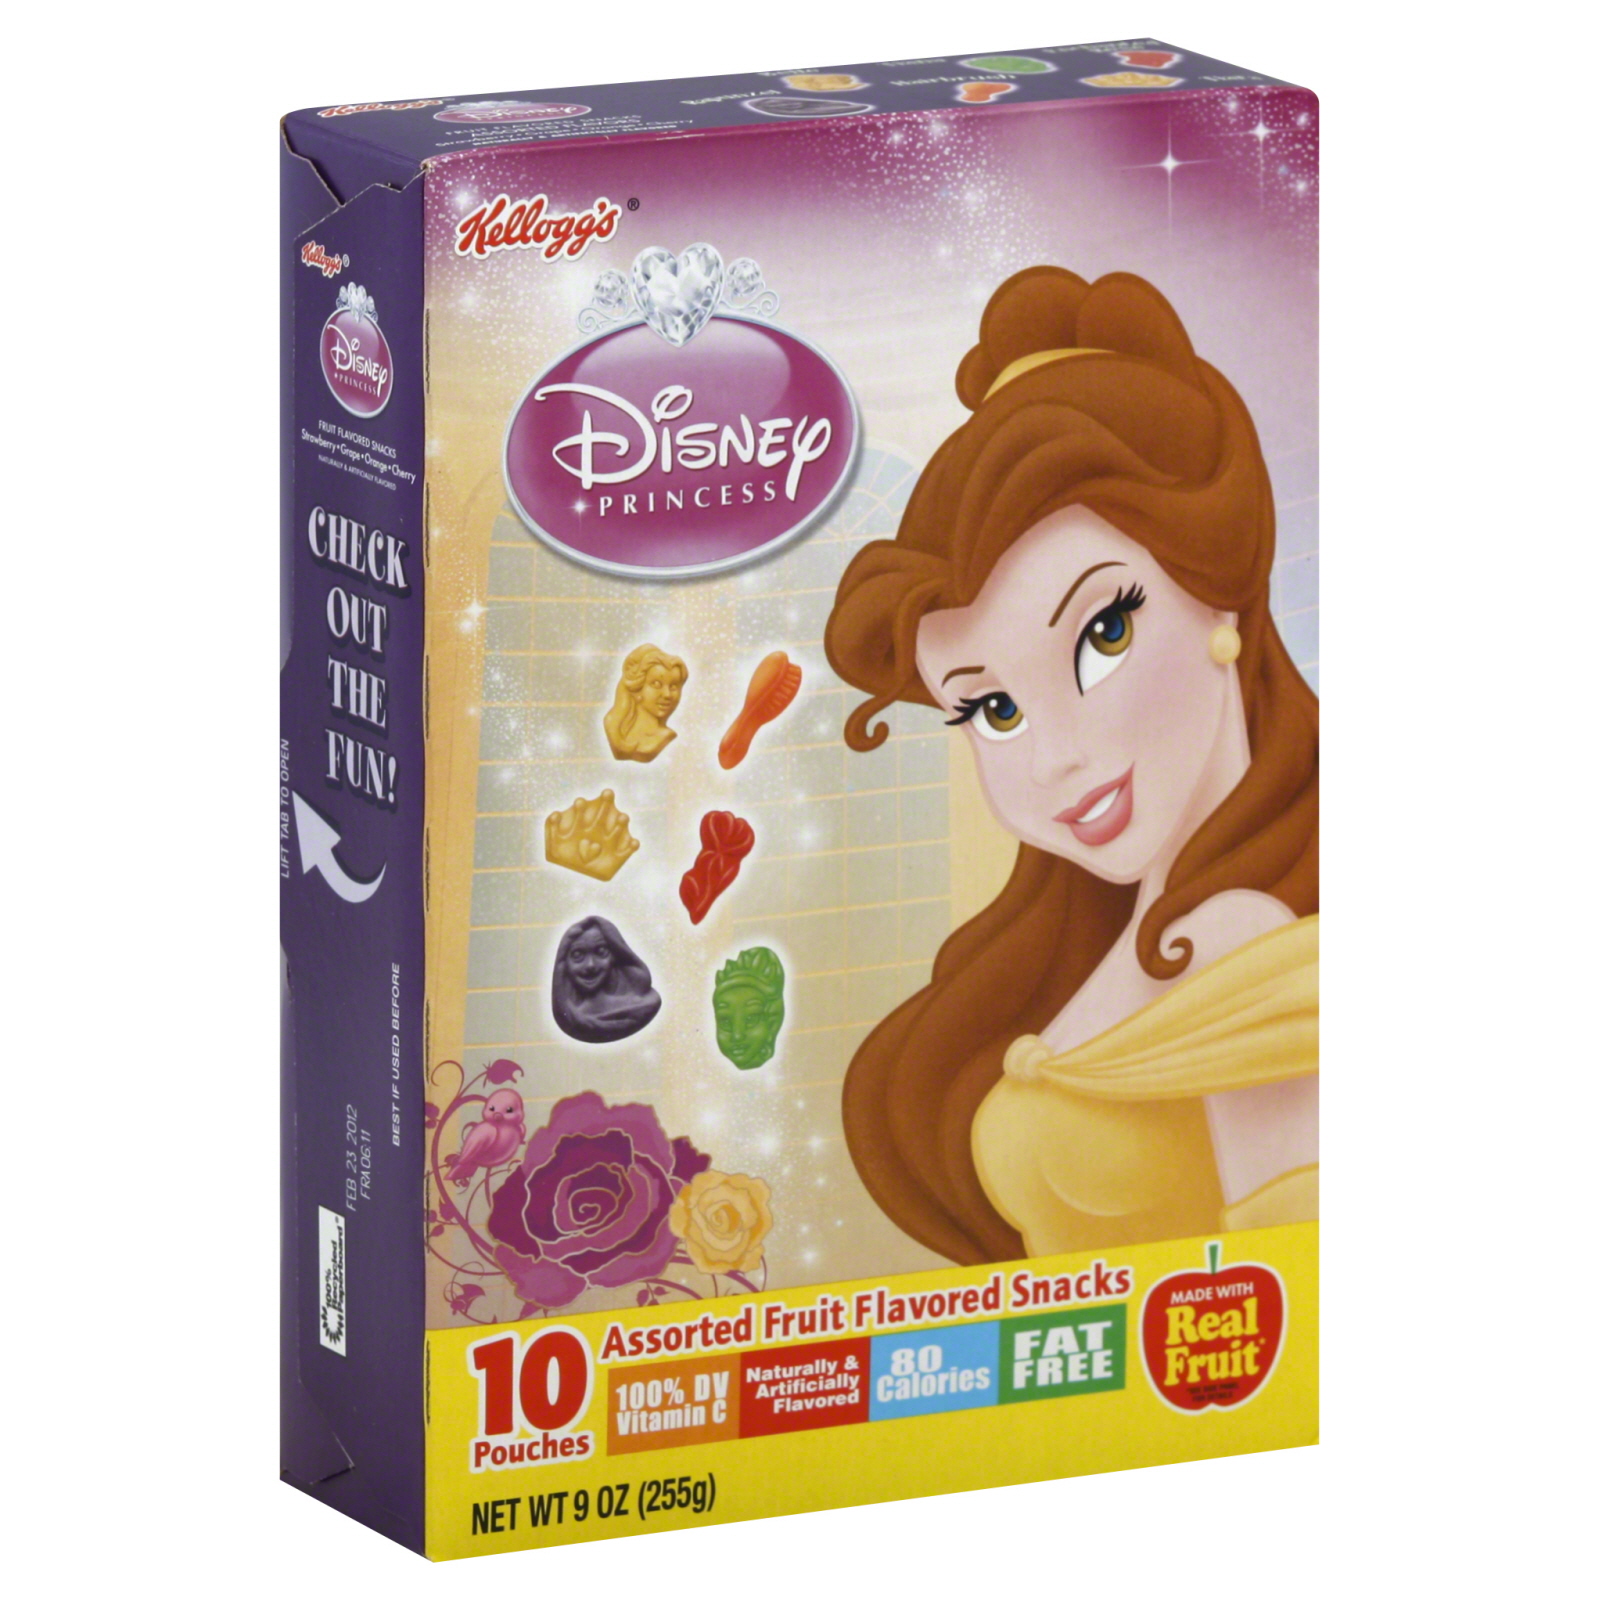 Kellogg's Fruit Flavored Snacks, Assorted, Disney Princess The Princess and the Frog, 10 pouches [9 oz (255 g)]